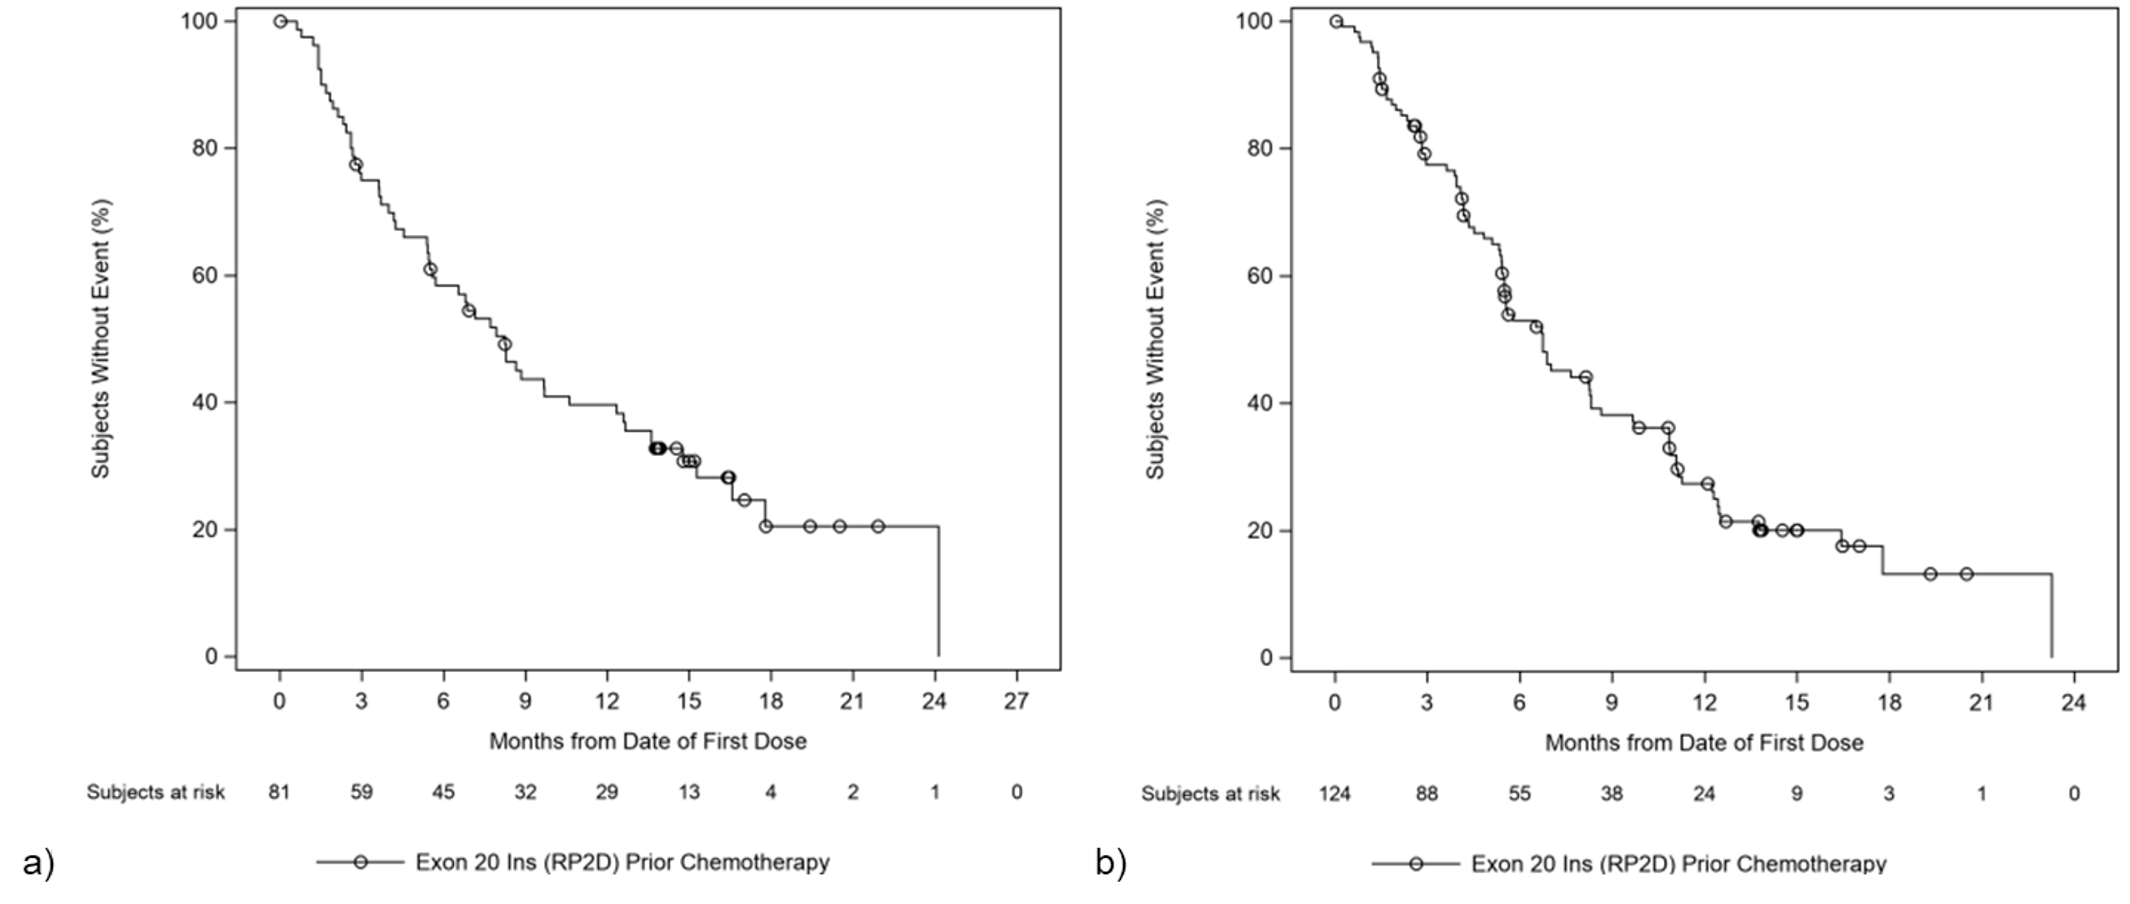 Kaplan-Meier plot of PFS in the primary efficacy population (N = 81) per investigator assessment (a) and BICR (b) as of the March 30, 2021 DCO. Median PFS was similar for investigator and BICR assessments at 8.25 months (95% CI, 5.49 to 12.32) and 8.31 months (95% CI, 5.52 to 11.07), respectively.